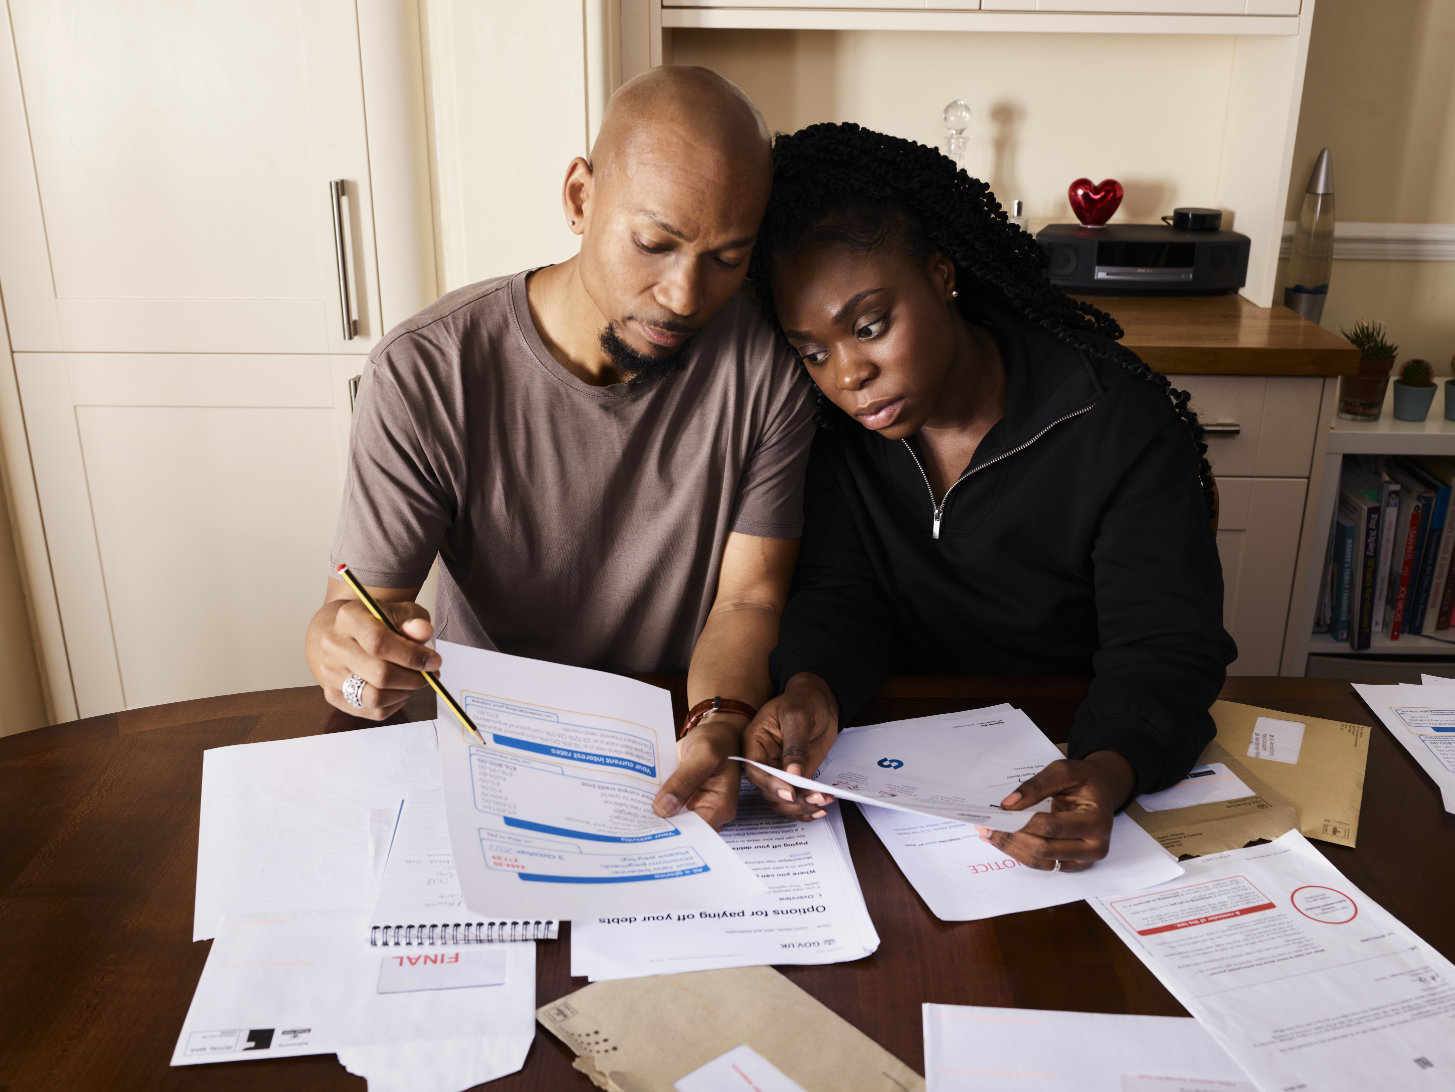 photo of a couple at a kitchen table examining bills